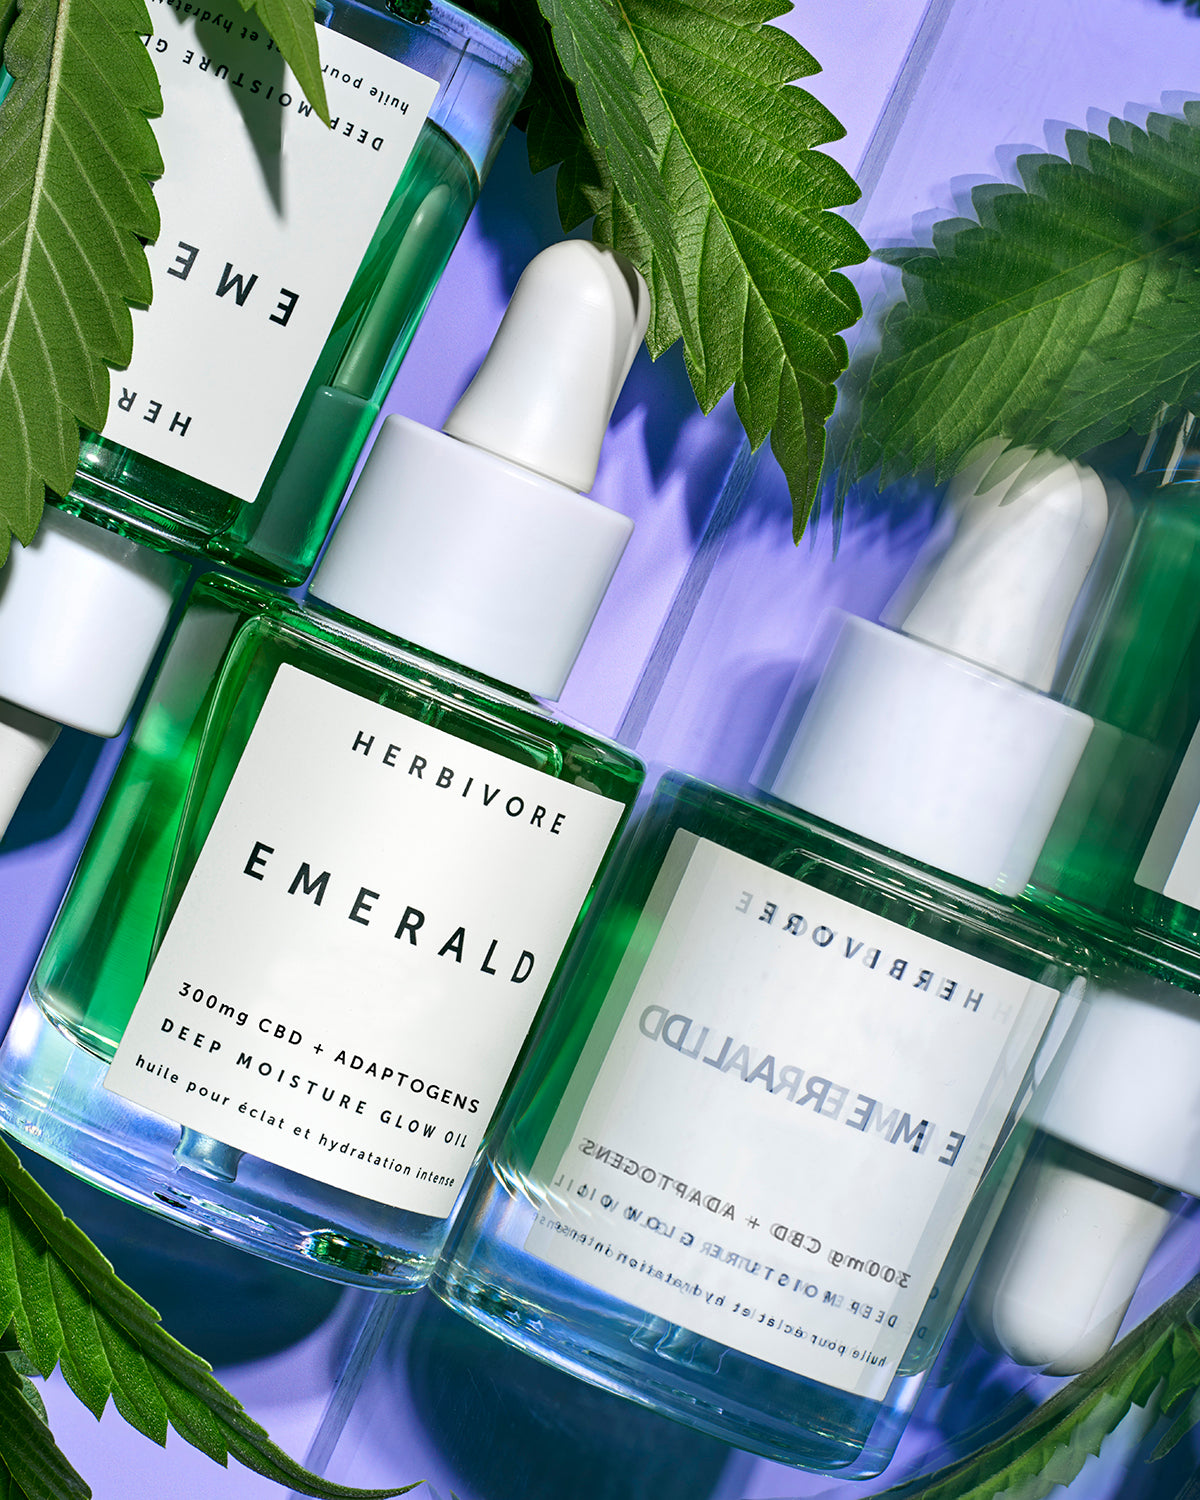 What Are Reviewers Saying About Emerald CBD?